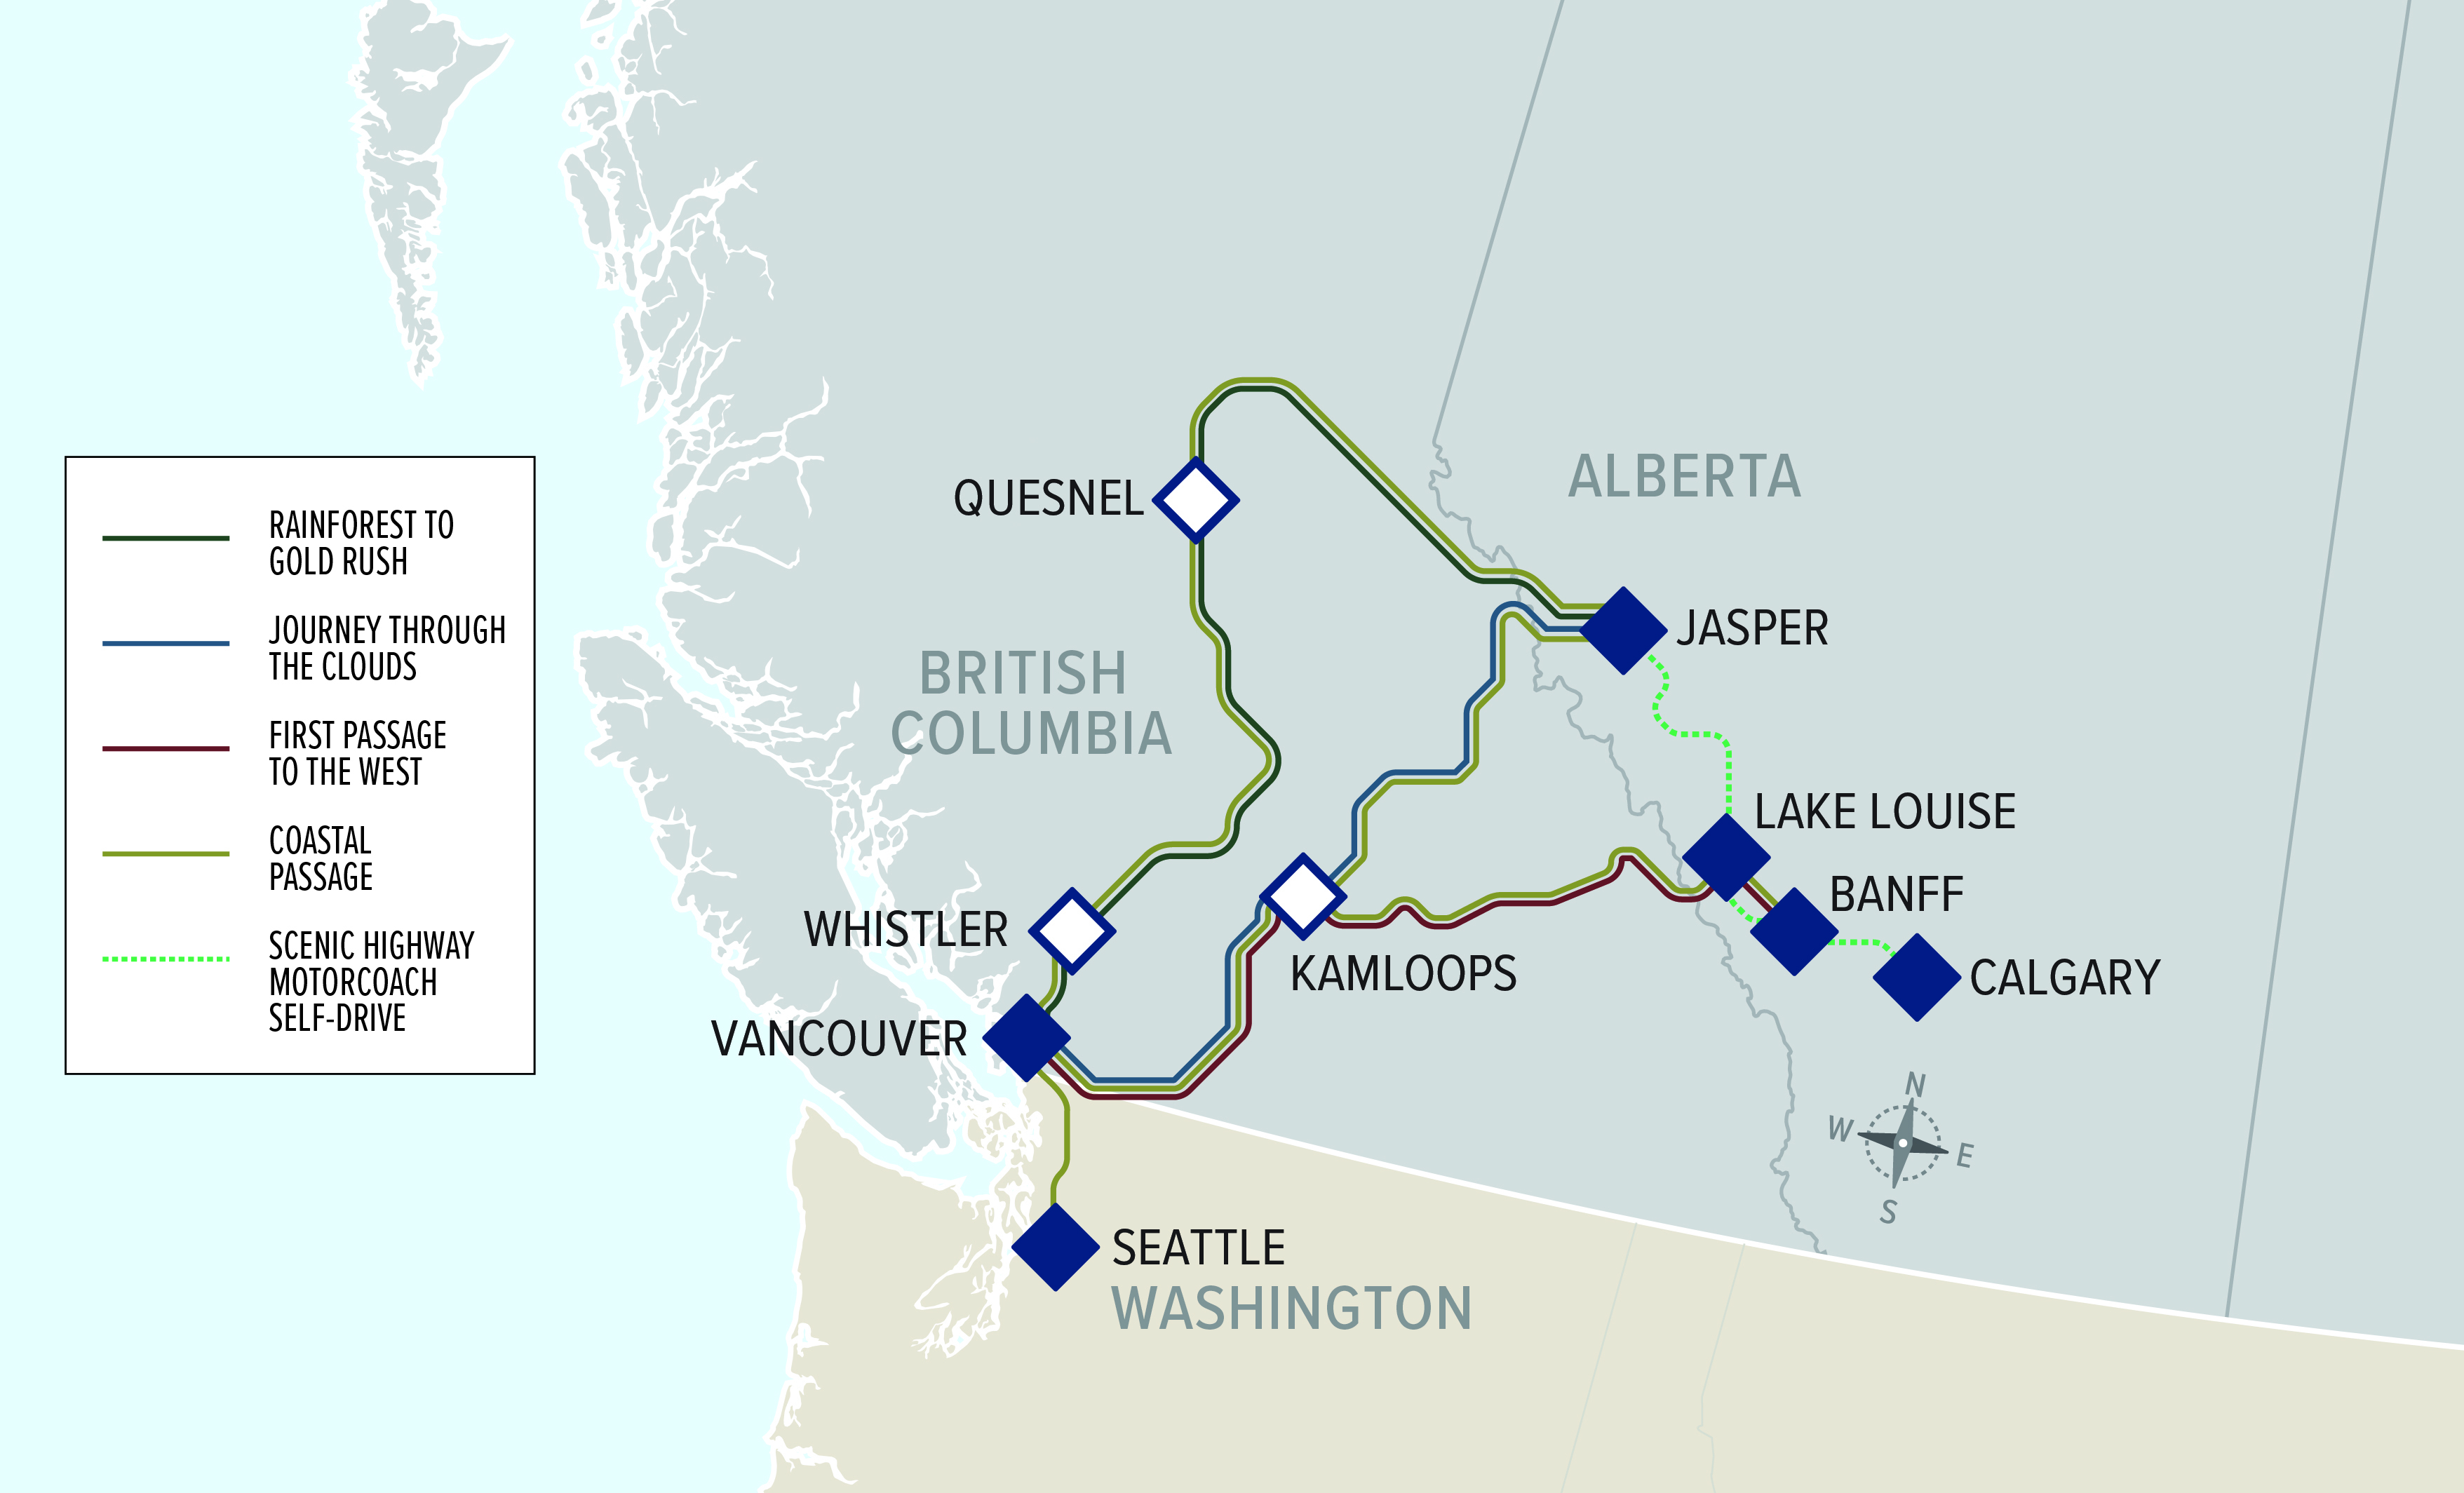 Rocky mountaineer train route map